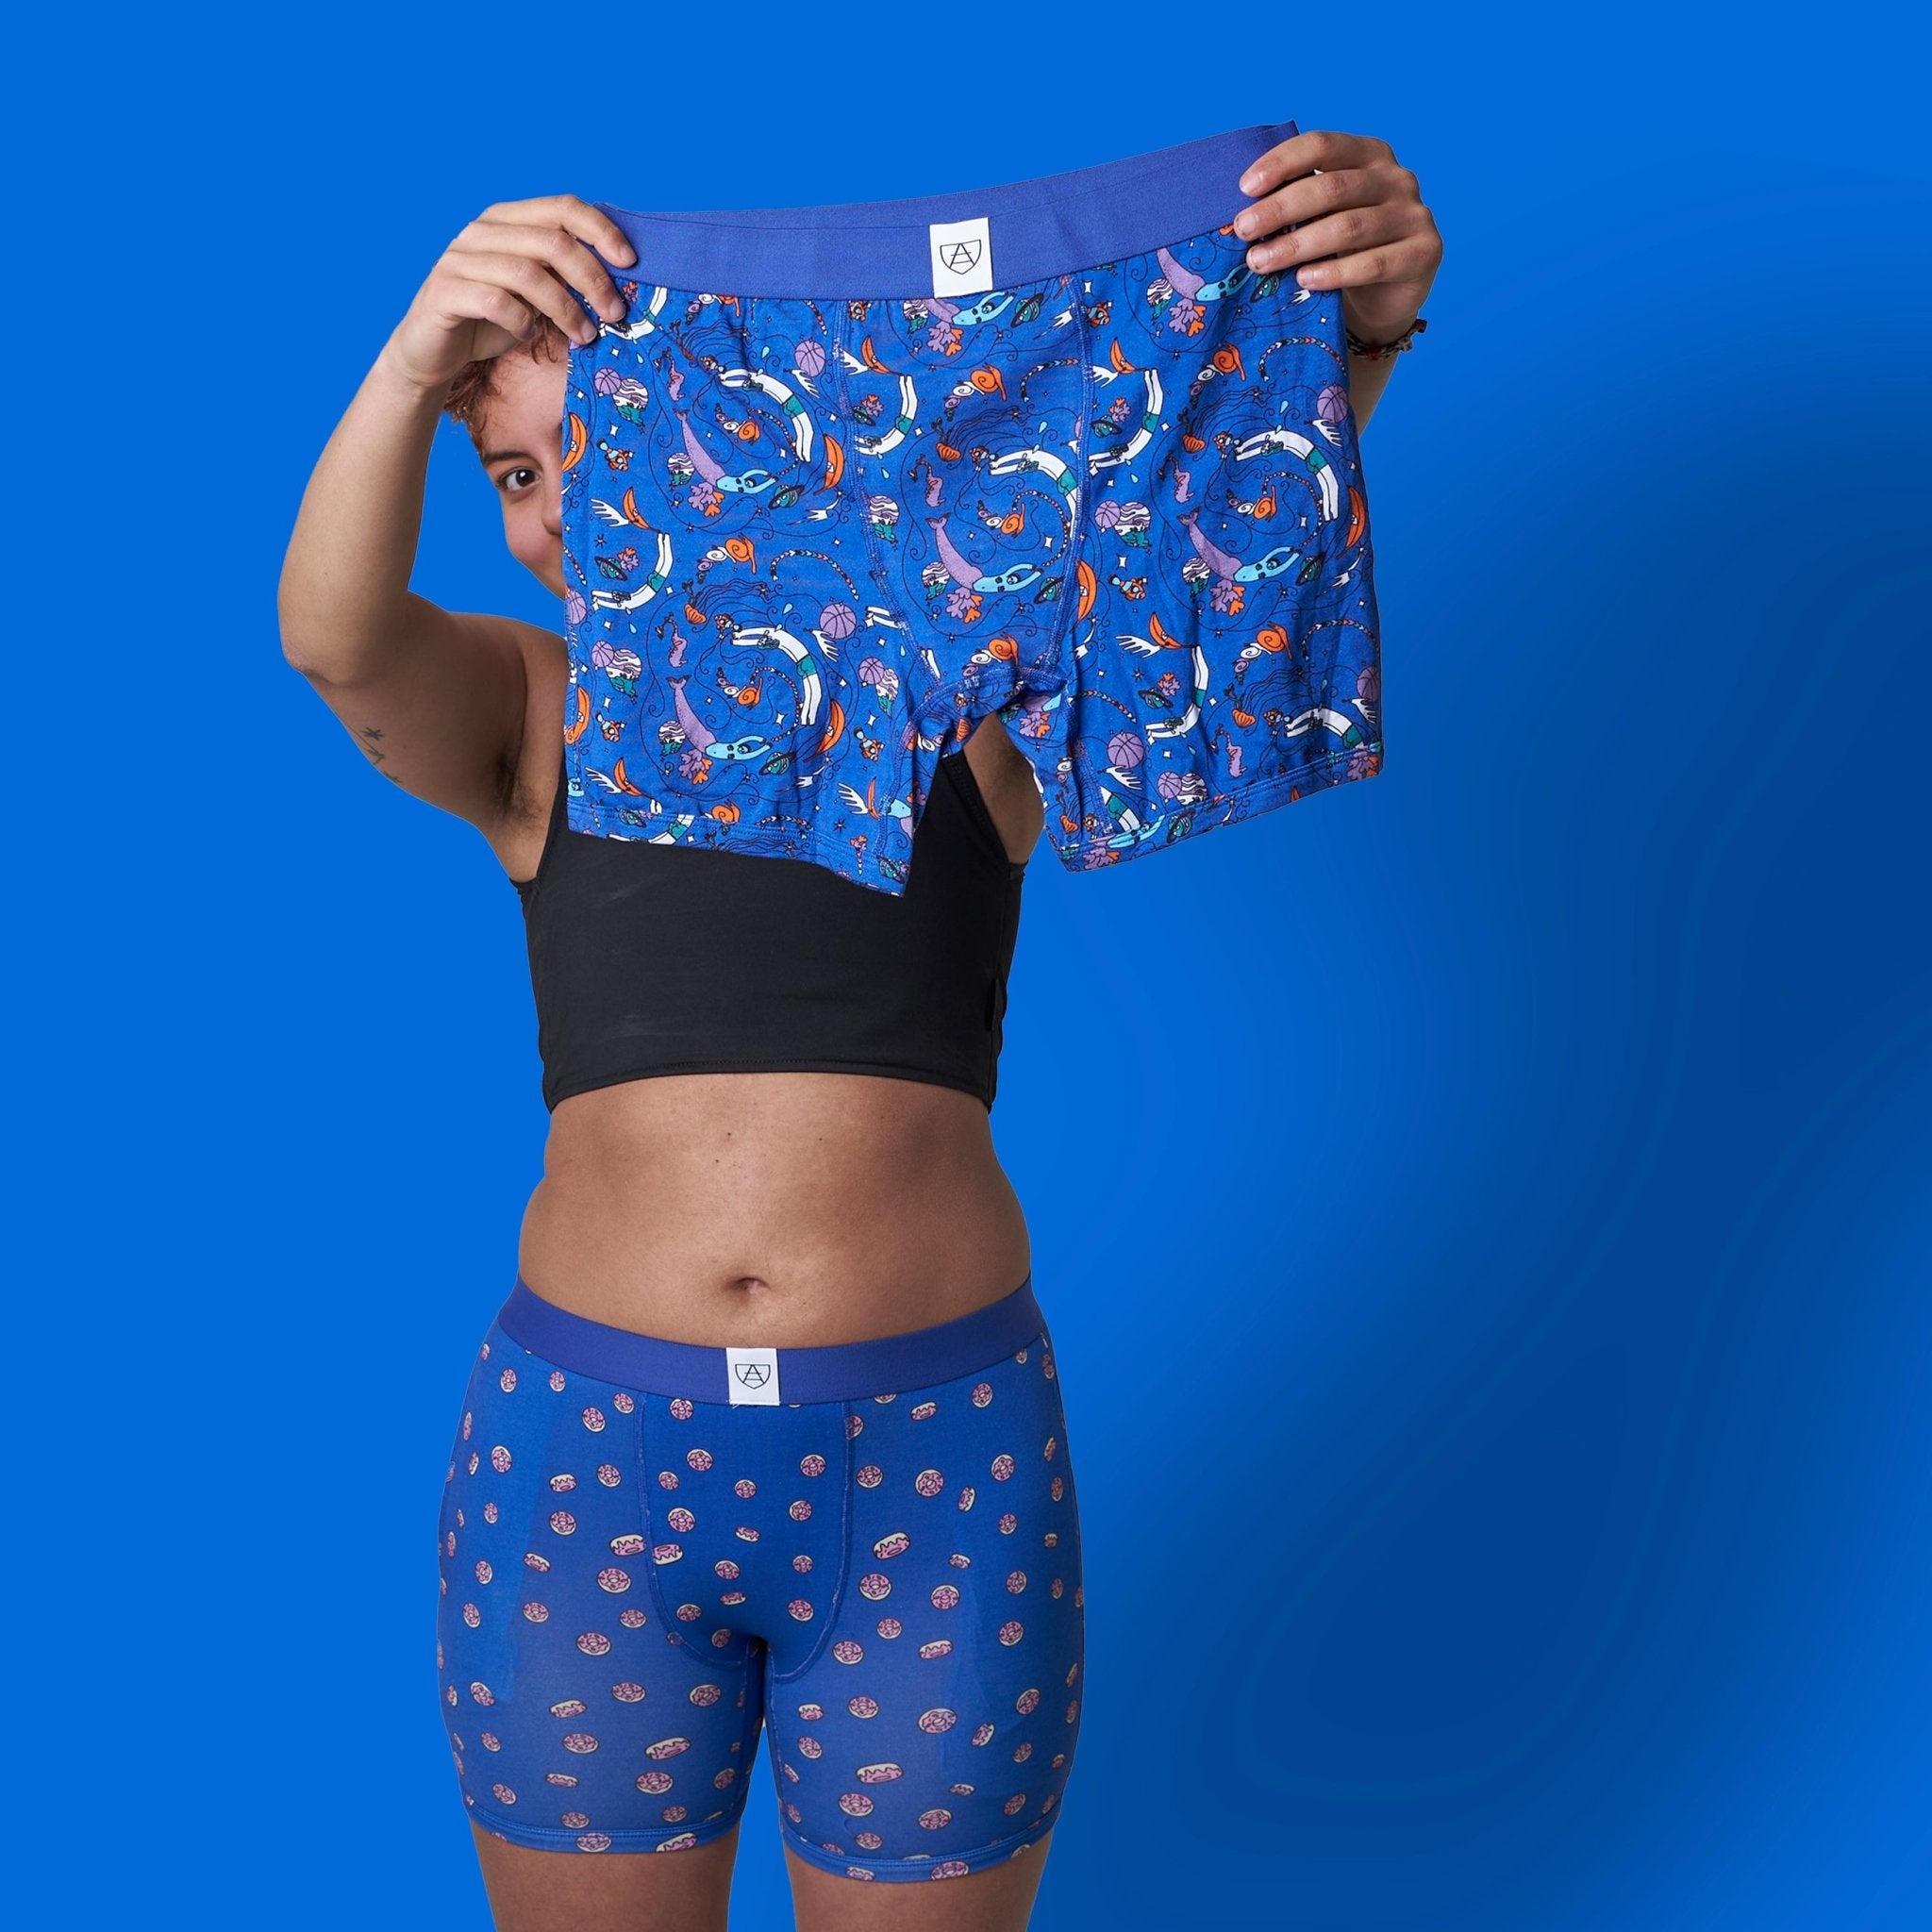 THE BEST PACKING UNDERWEAR? (FTM/NON BINARY) 